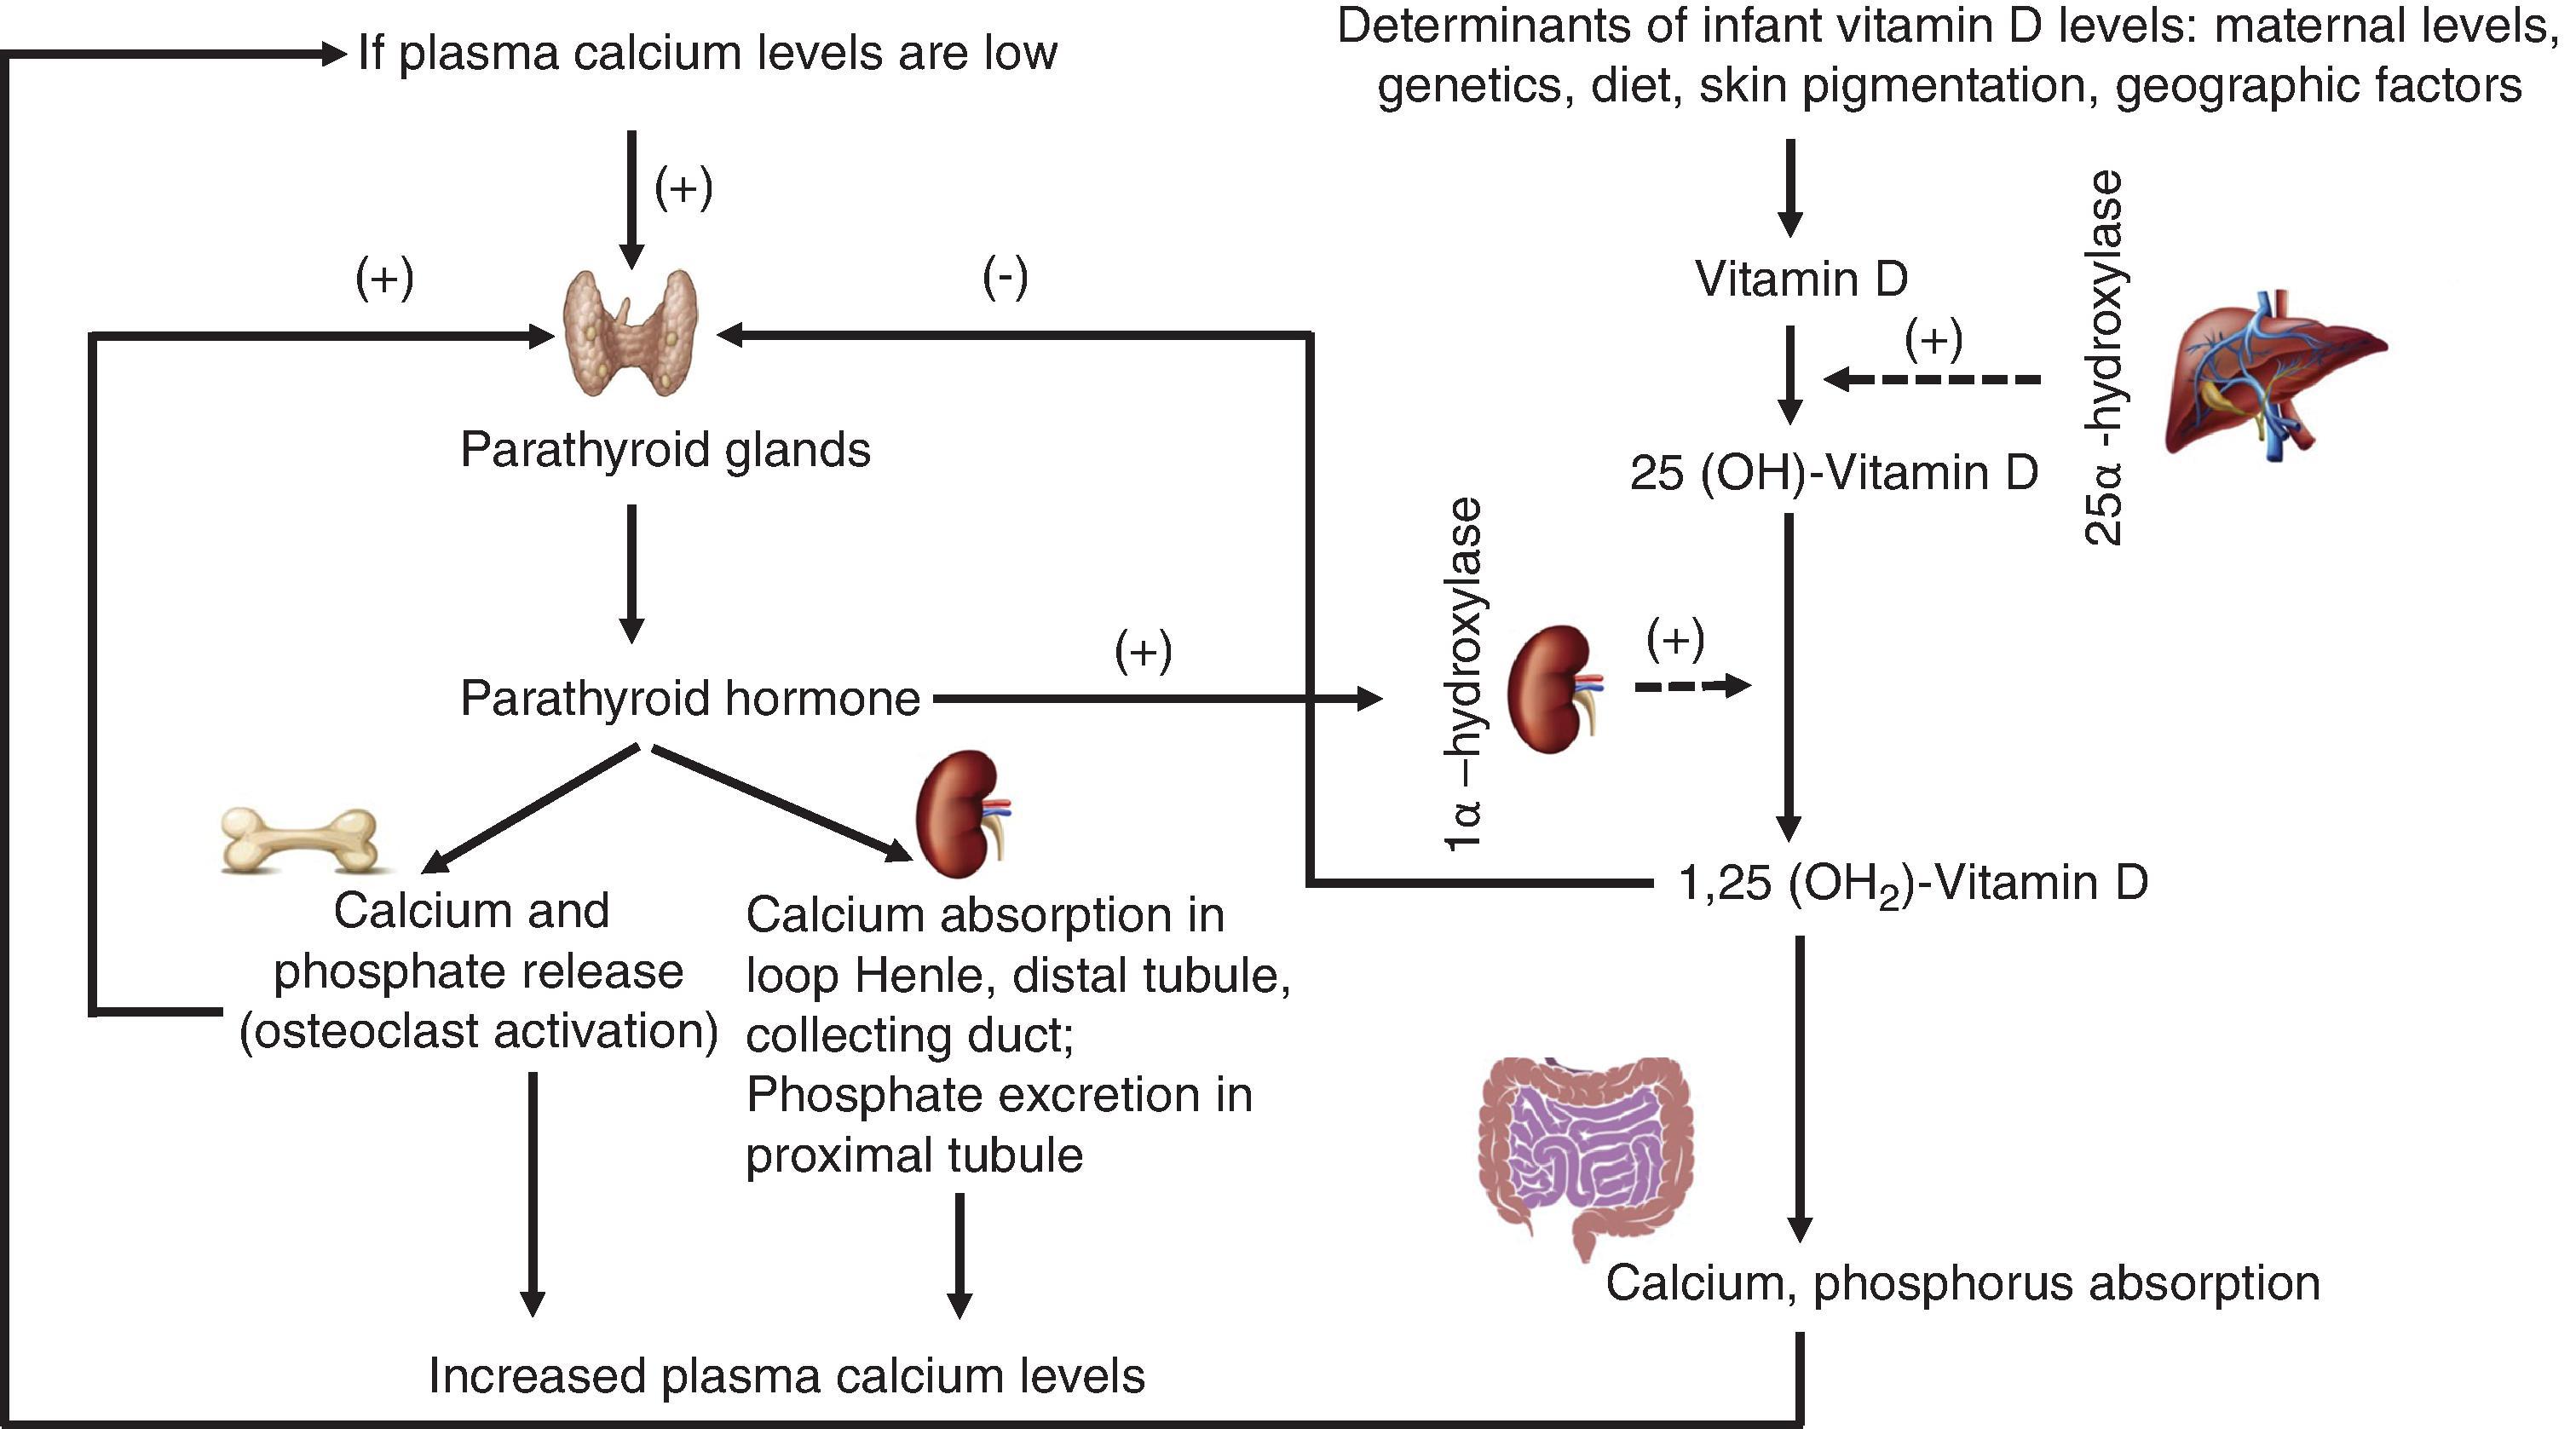 Fig. 28.1, Physiology of Calcium and Metabolism Regulation. (Modified from Montaner Ramón A. Risk factors of bone mineral metabolic disorders. Semin Fetal Neonatal Med. 2020;25[1]:101068. doi: 10.1016/j.siny.2019.101068 .)